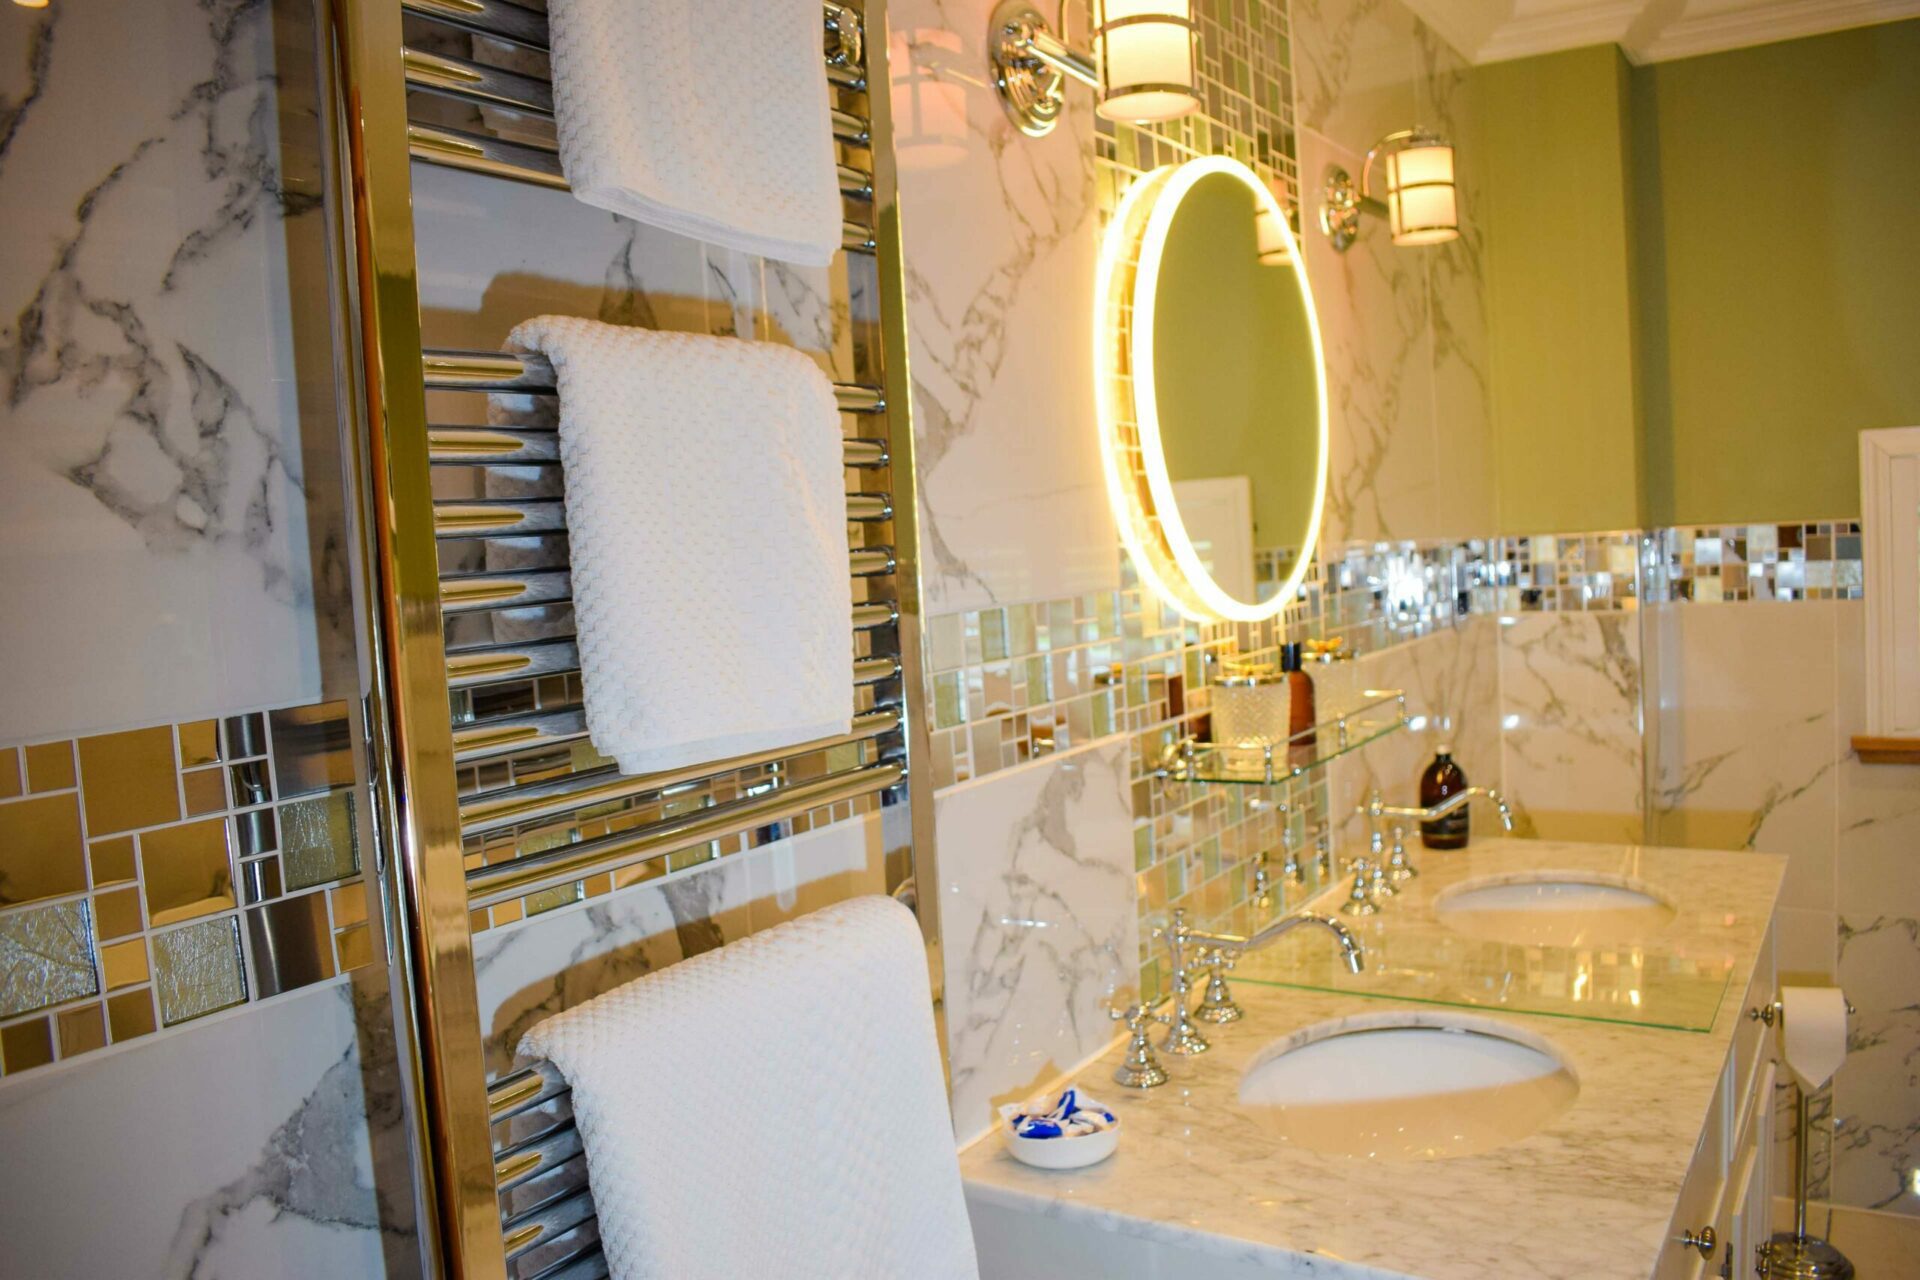 The marble tiled bathroom in our Skyfall Hideaway ads to the opulence of the accommodation